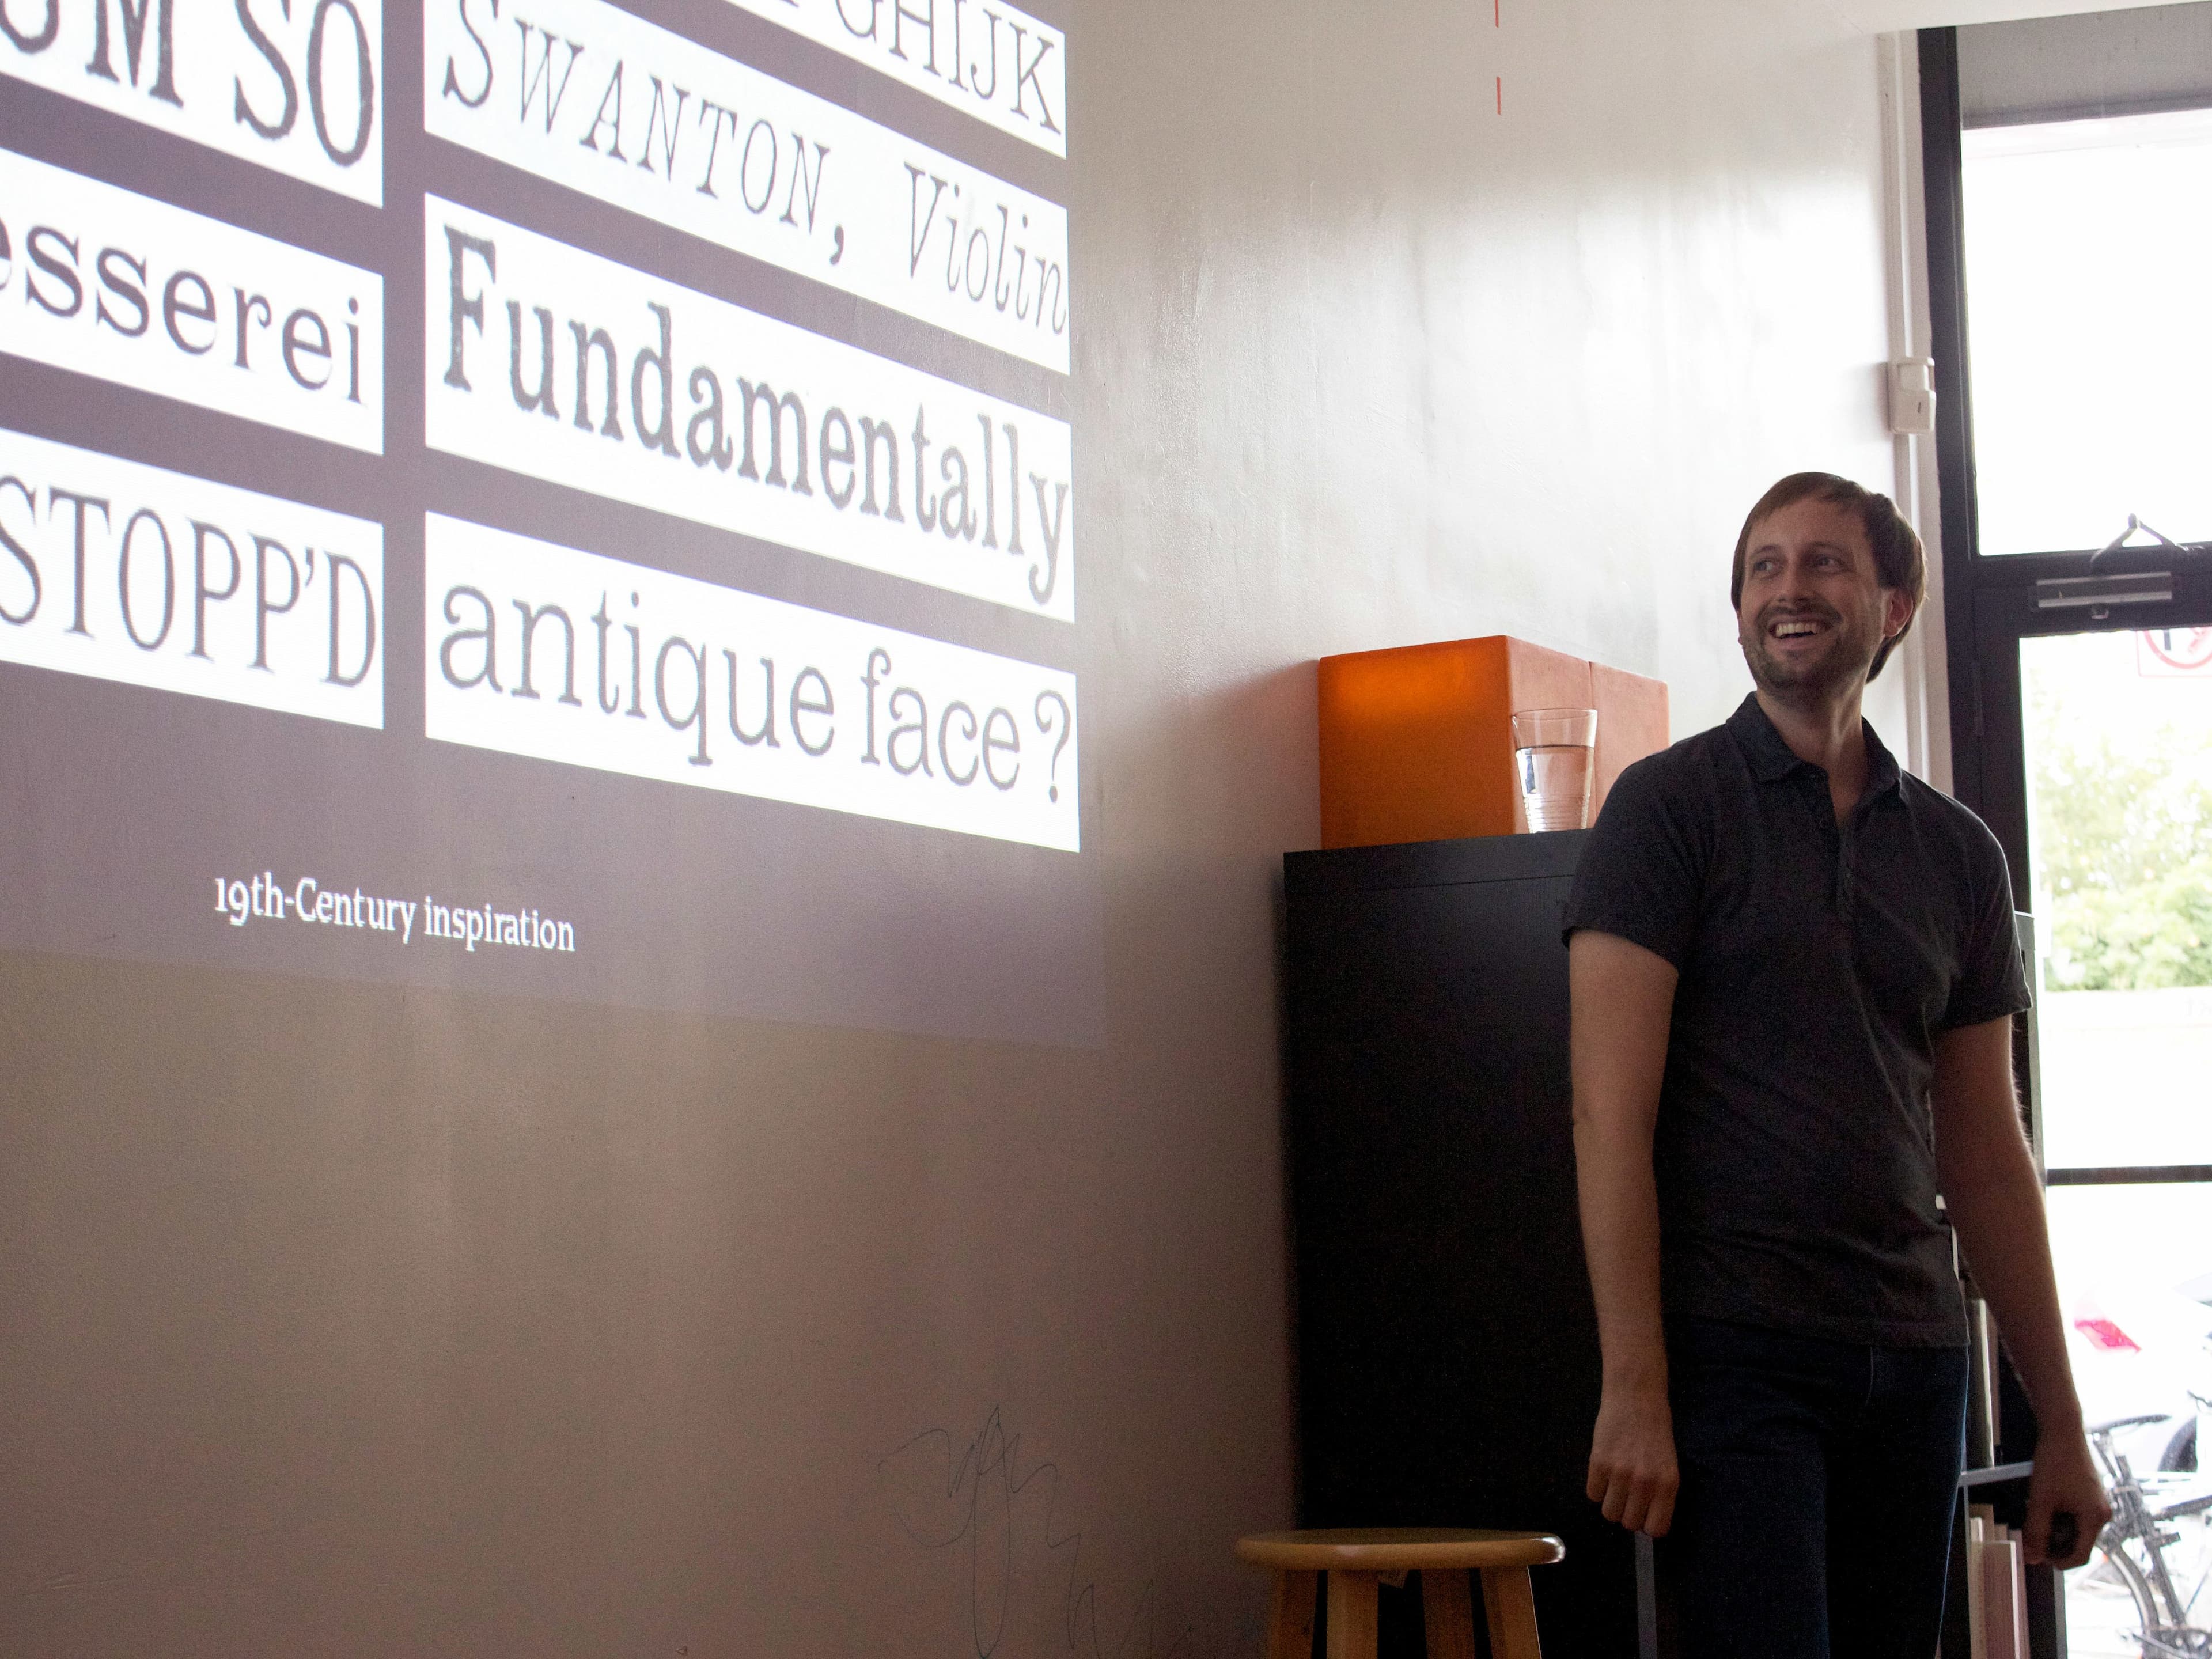 A man in a black shirt stands smiling, looking at a projection on the wall that displays text in various fonts and styles, including phrases like "Fundamentally antique face?" and "19th-Century Inspiration." He stands next to a stool and a dark cabinet with a glass of water.